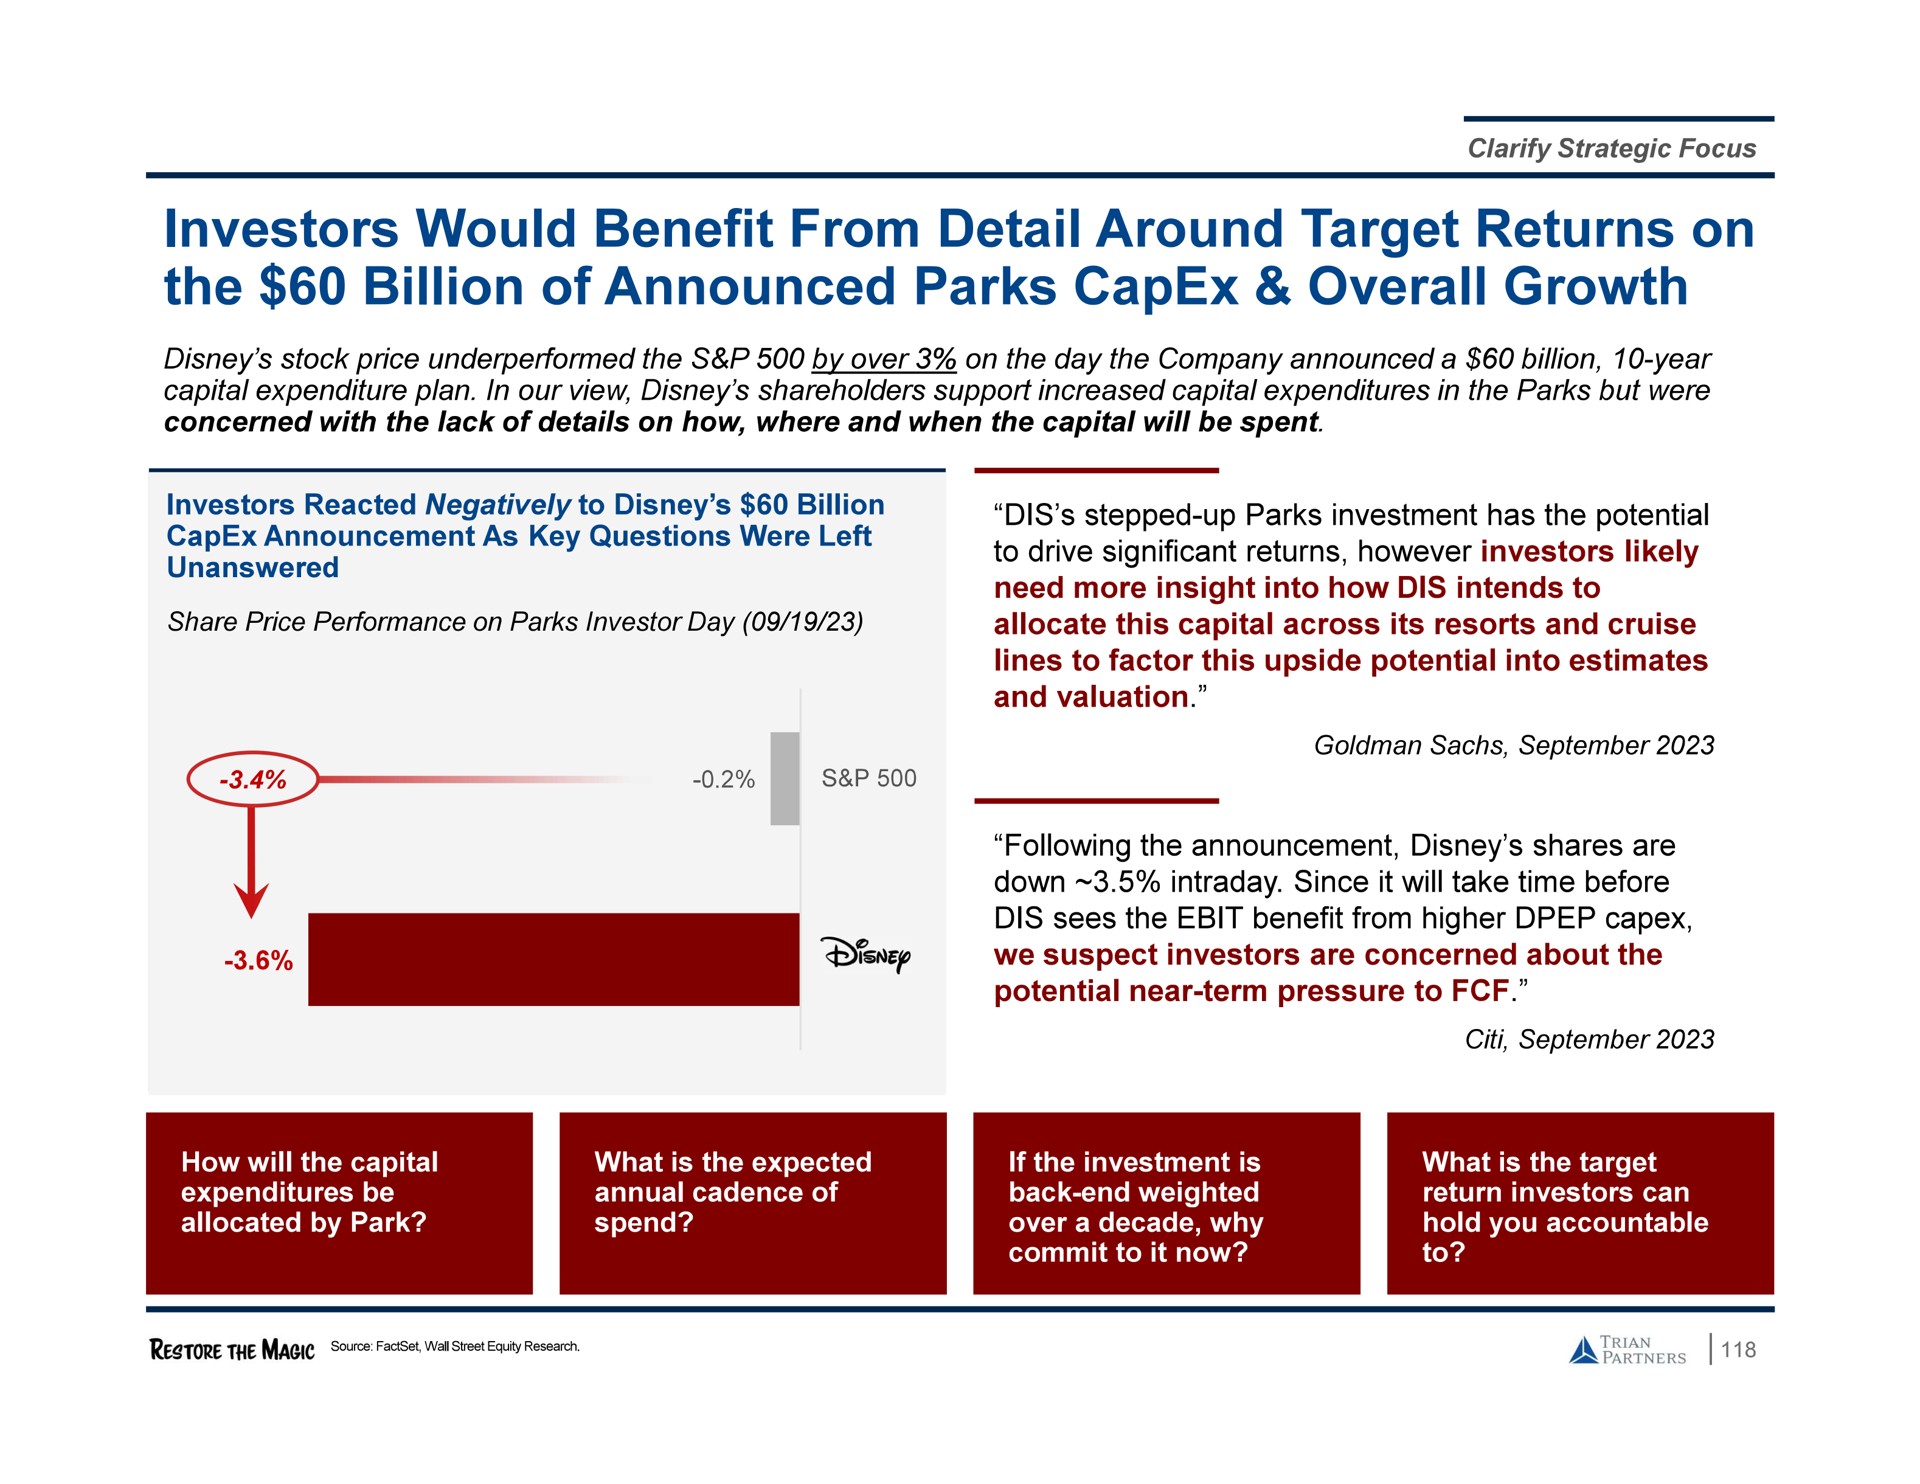 investors would benefit from detail around target returns on the billion of announced parks overall growth | Trian Partners